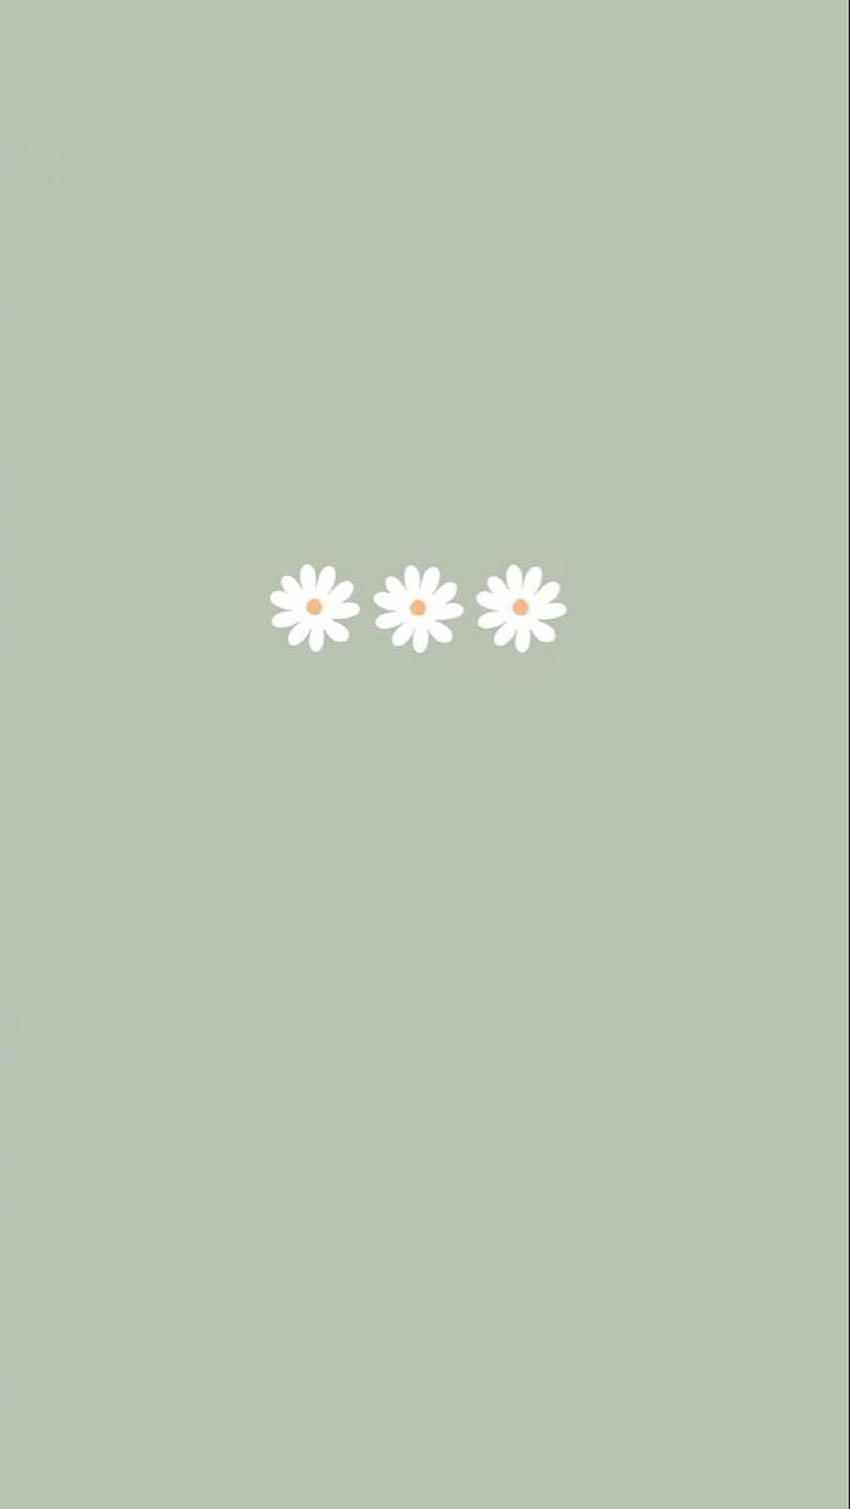 Pastel Cute Daisy Wallpapers Images  Free Download on Freepik